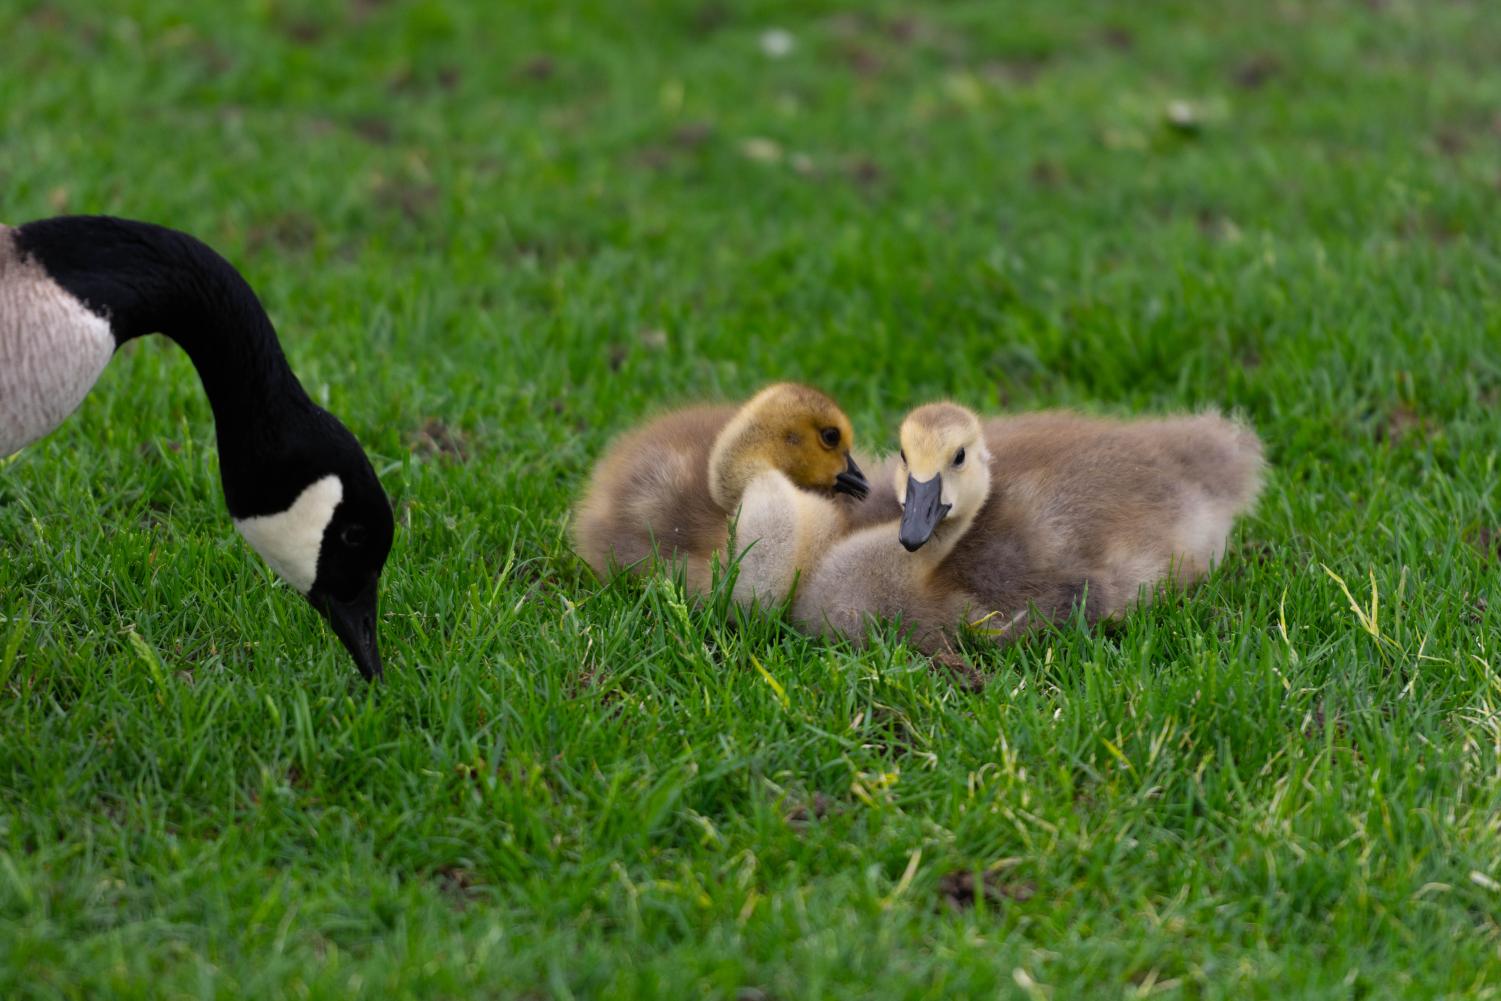 Two goslings sit next to each other on grass next to a goose.